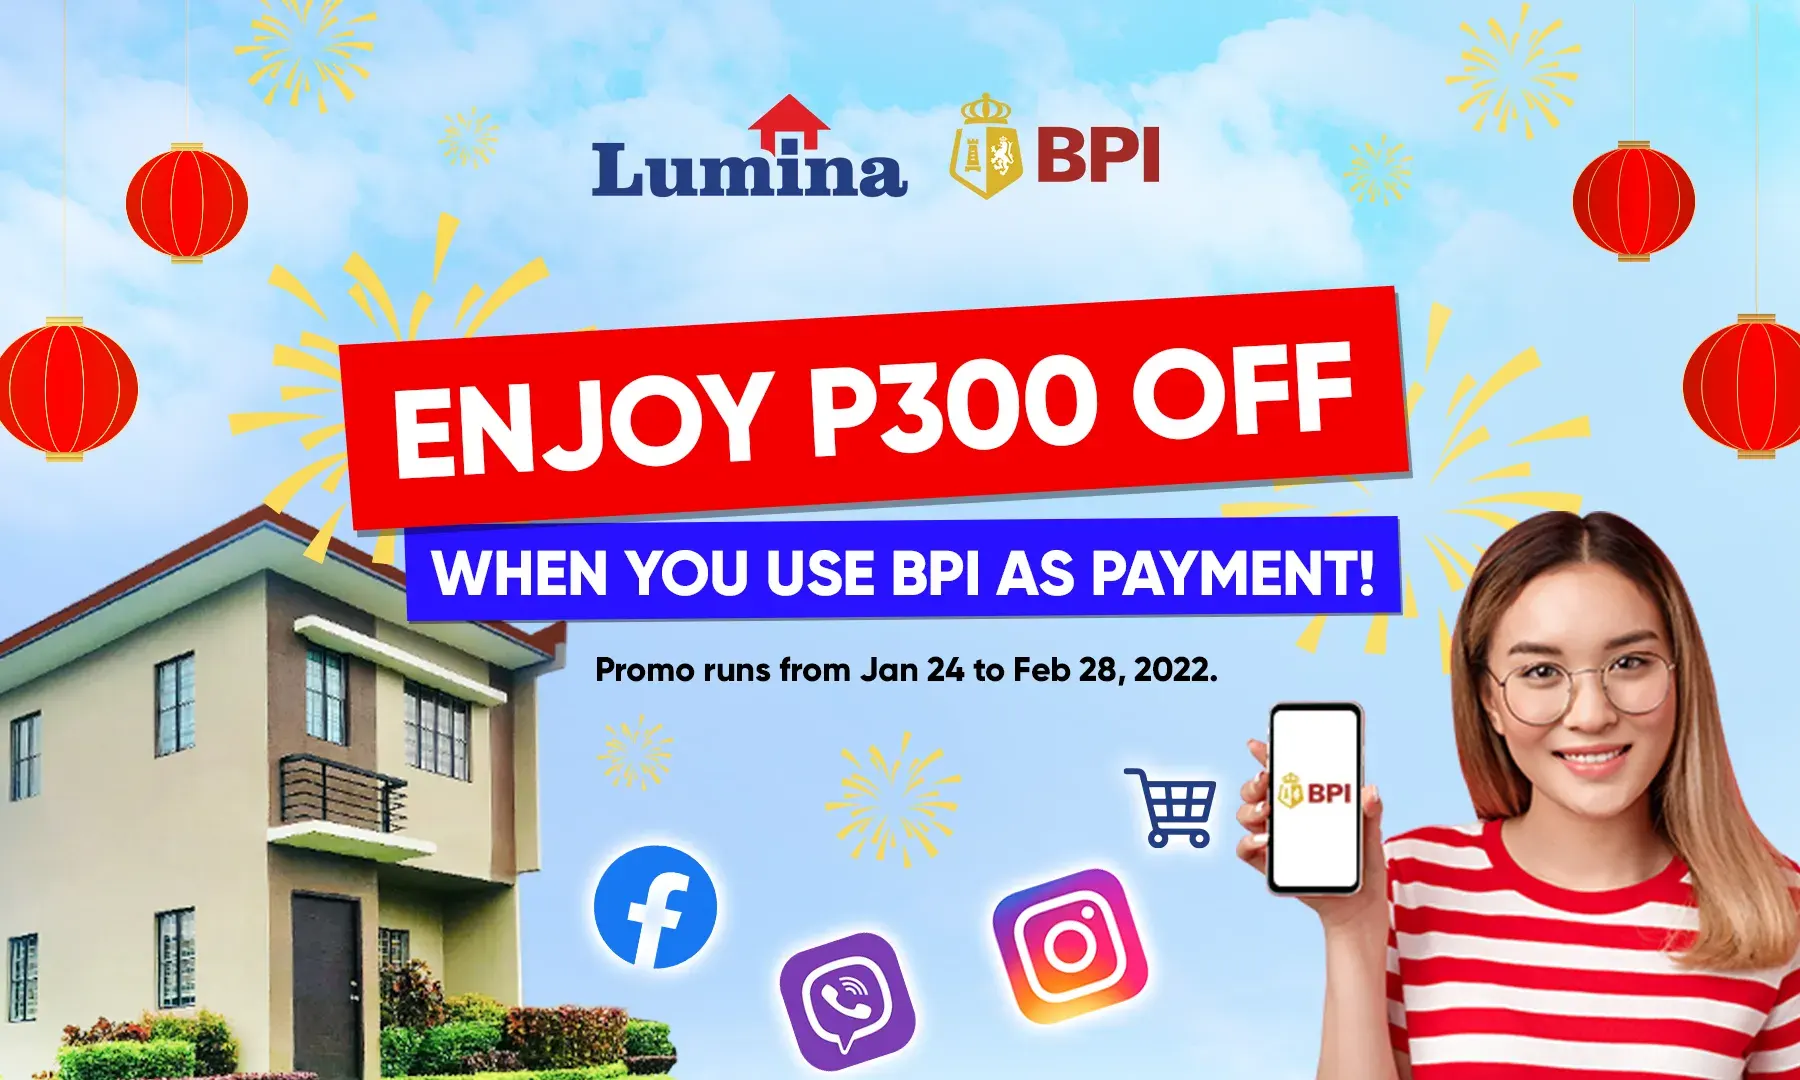 Reserve a Lumina Homes until Feb 28 and get a P300 discount from BPI min